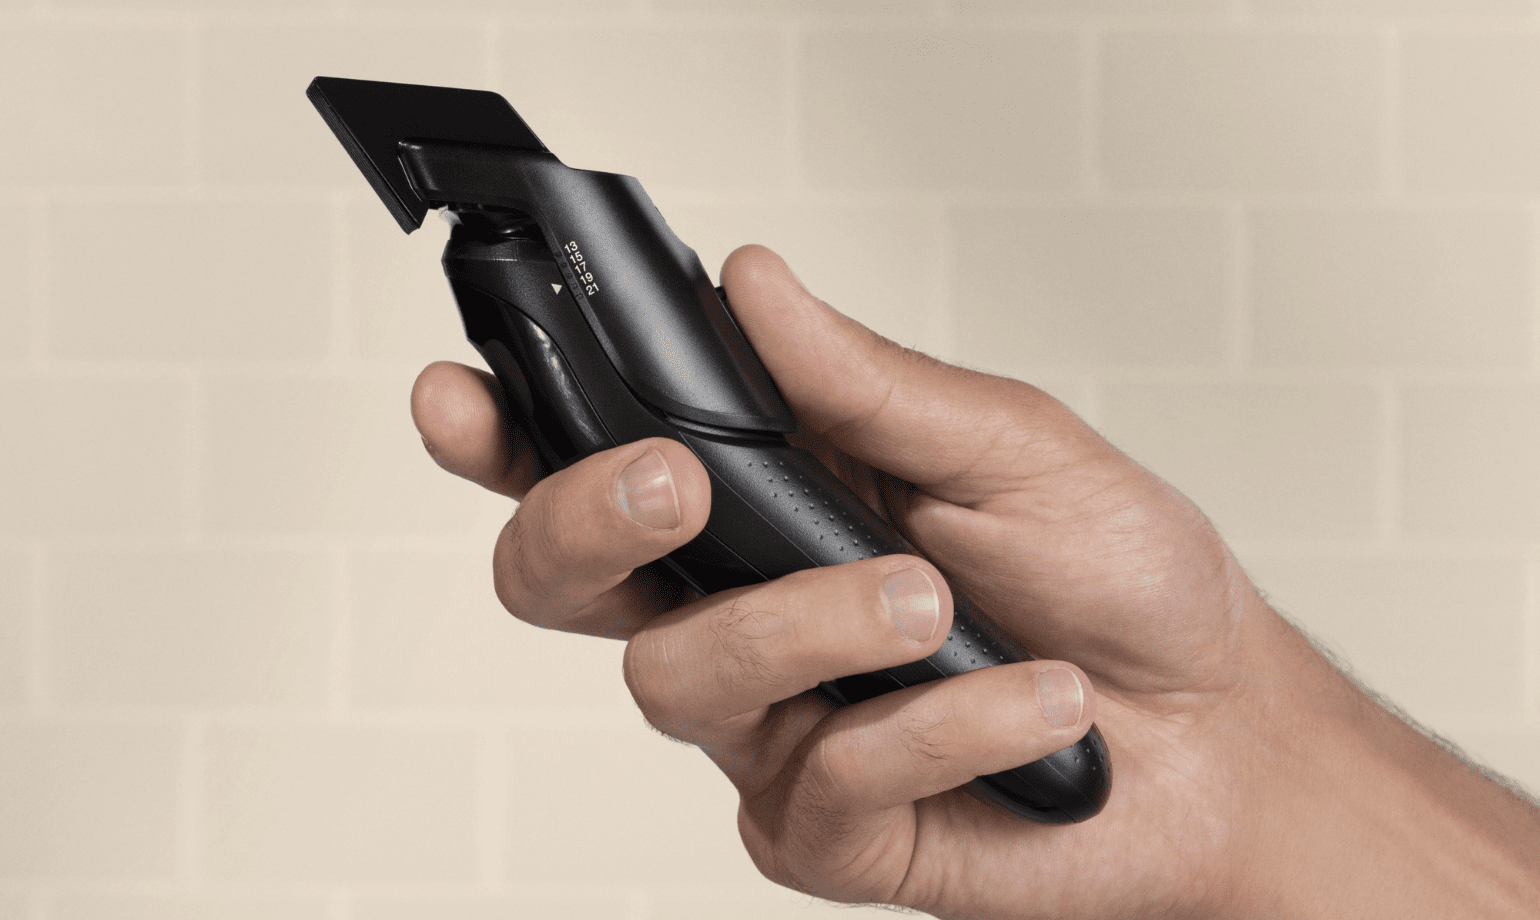 Trim And Shape Your Beard With King C. Gillette Beard Trimmer